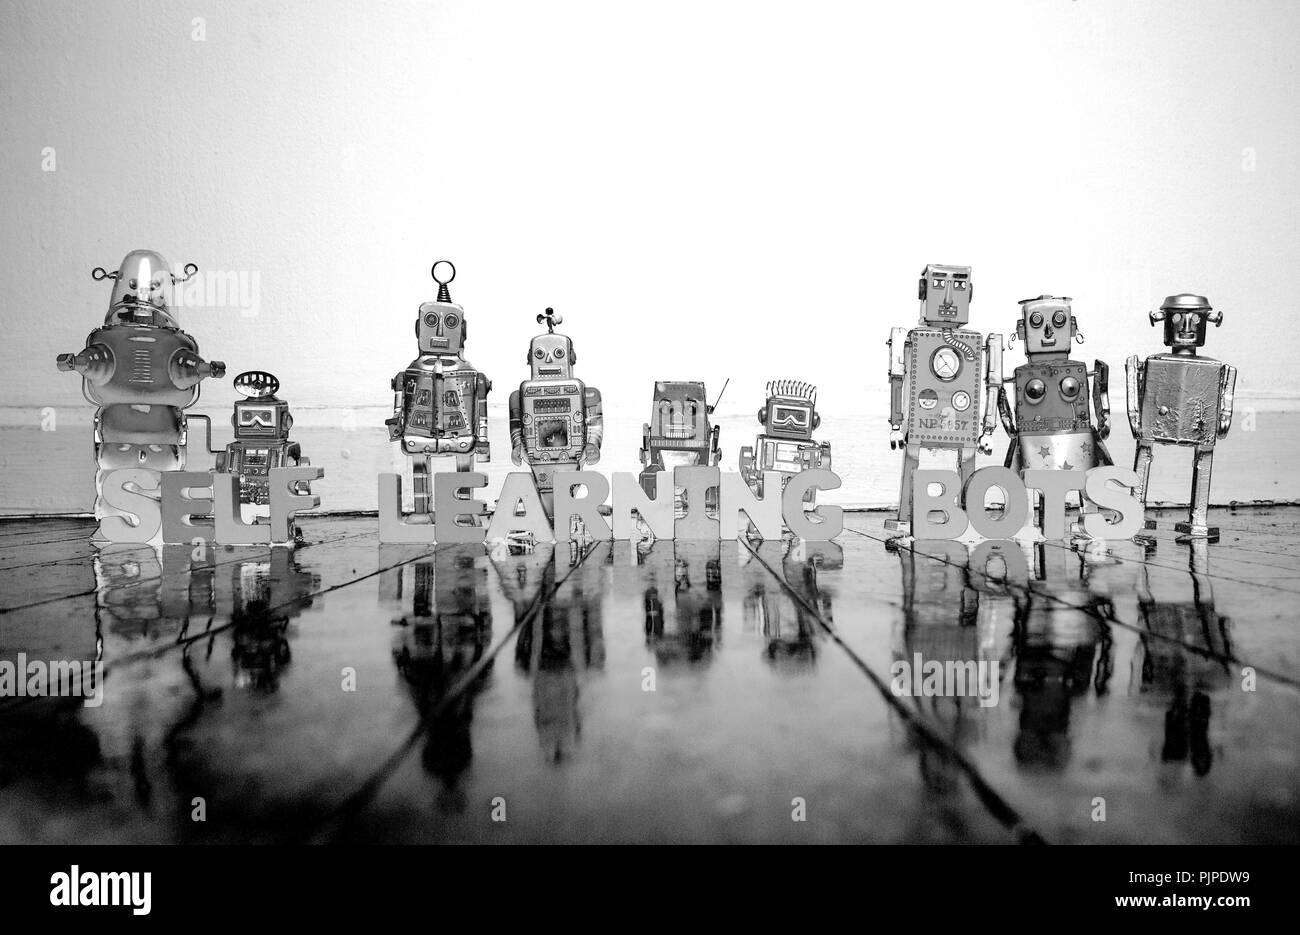 COMPUTER PROGRAMMING wooden letters and retro robot toys on a wooden floor with reflection solarized monochrome Stock Photo